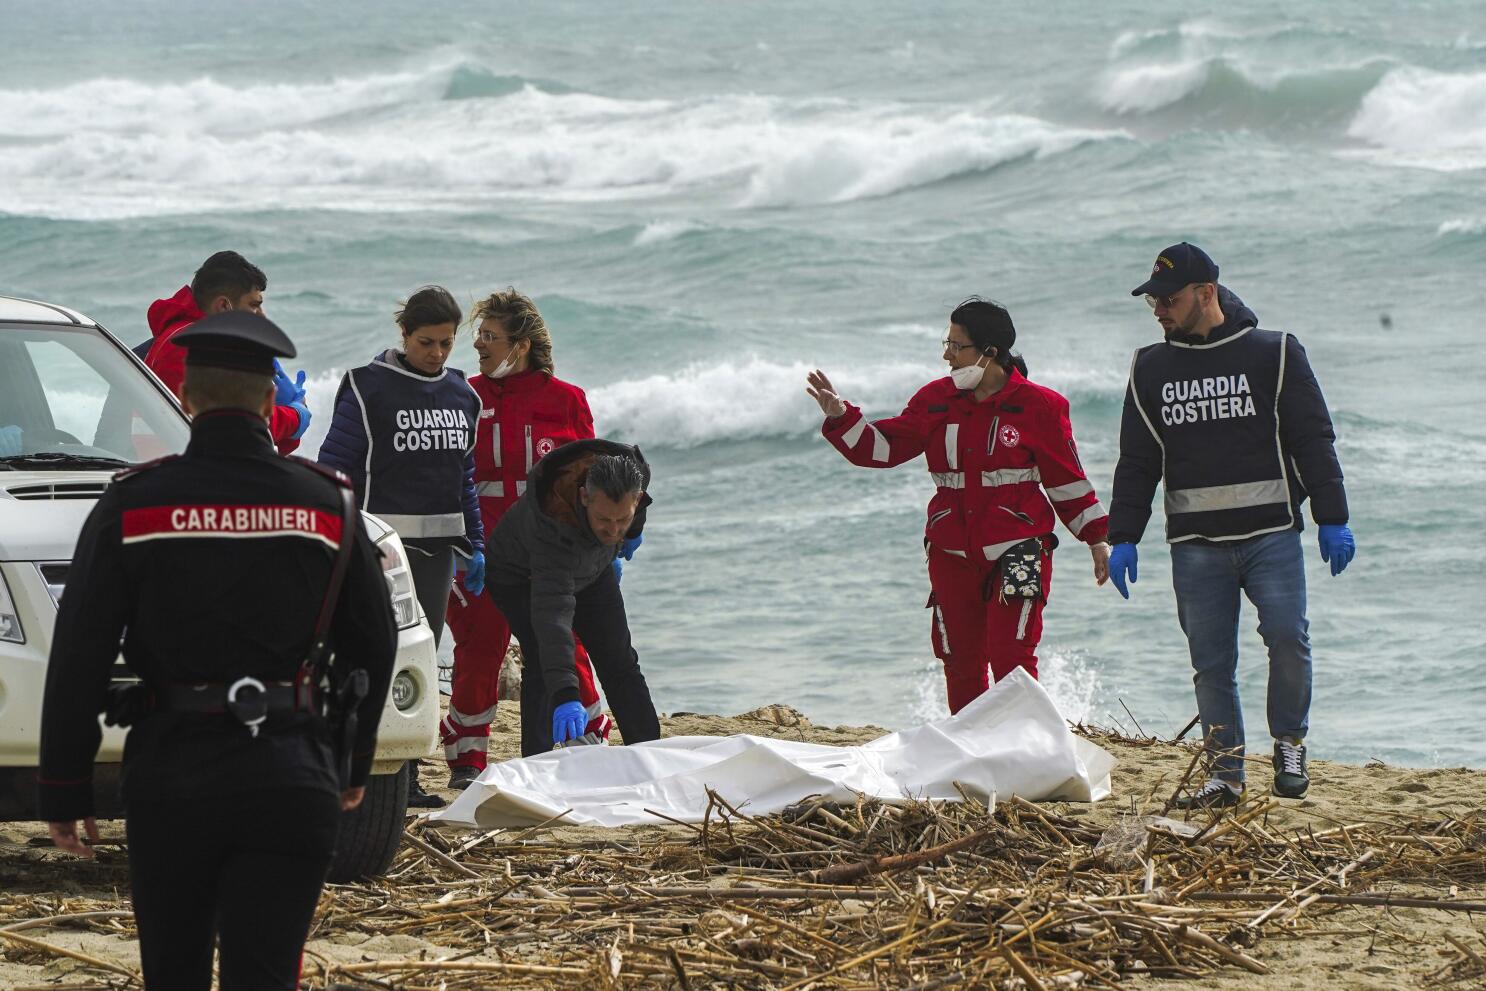 Rescuers find 64th body off Italy after migrant shipwreck - Los